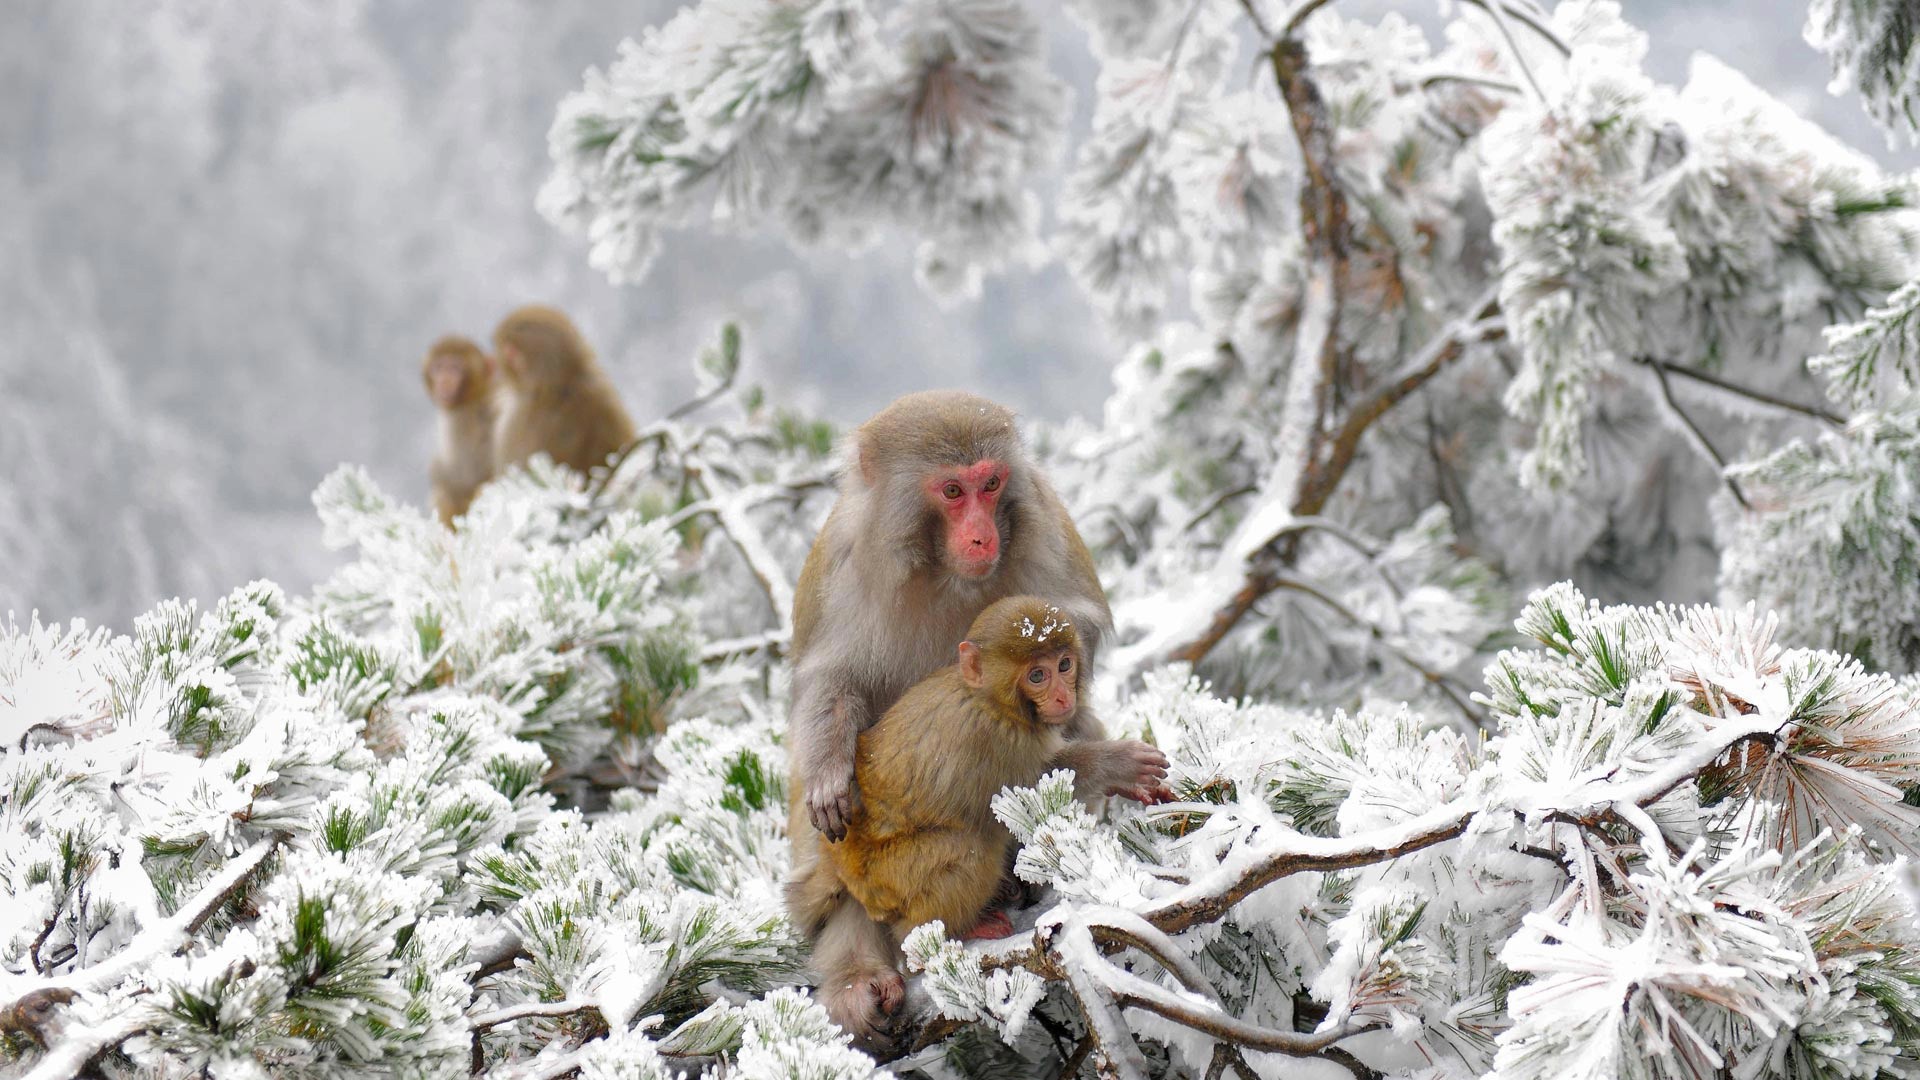 General 1920x1080 animals nature Japan winter apes snow cold macaques